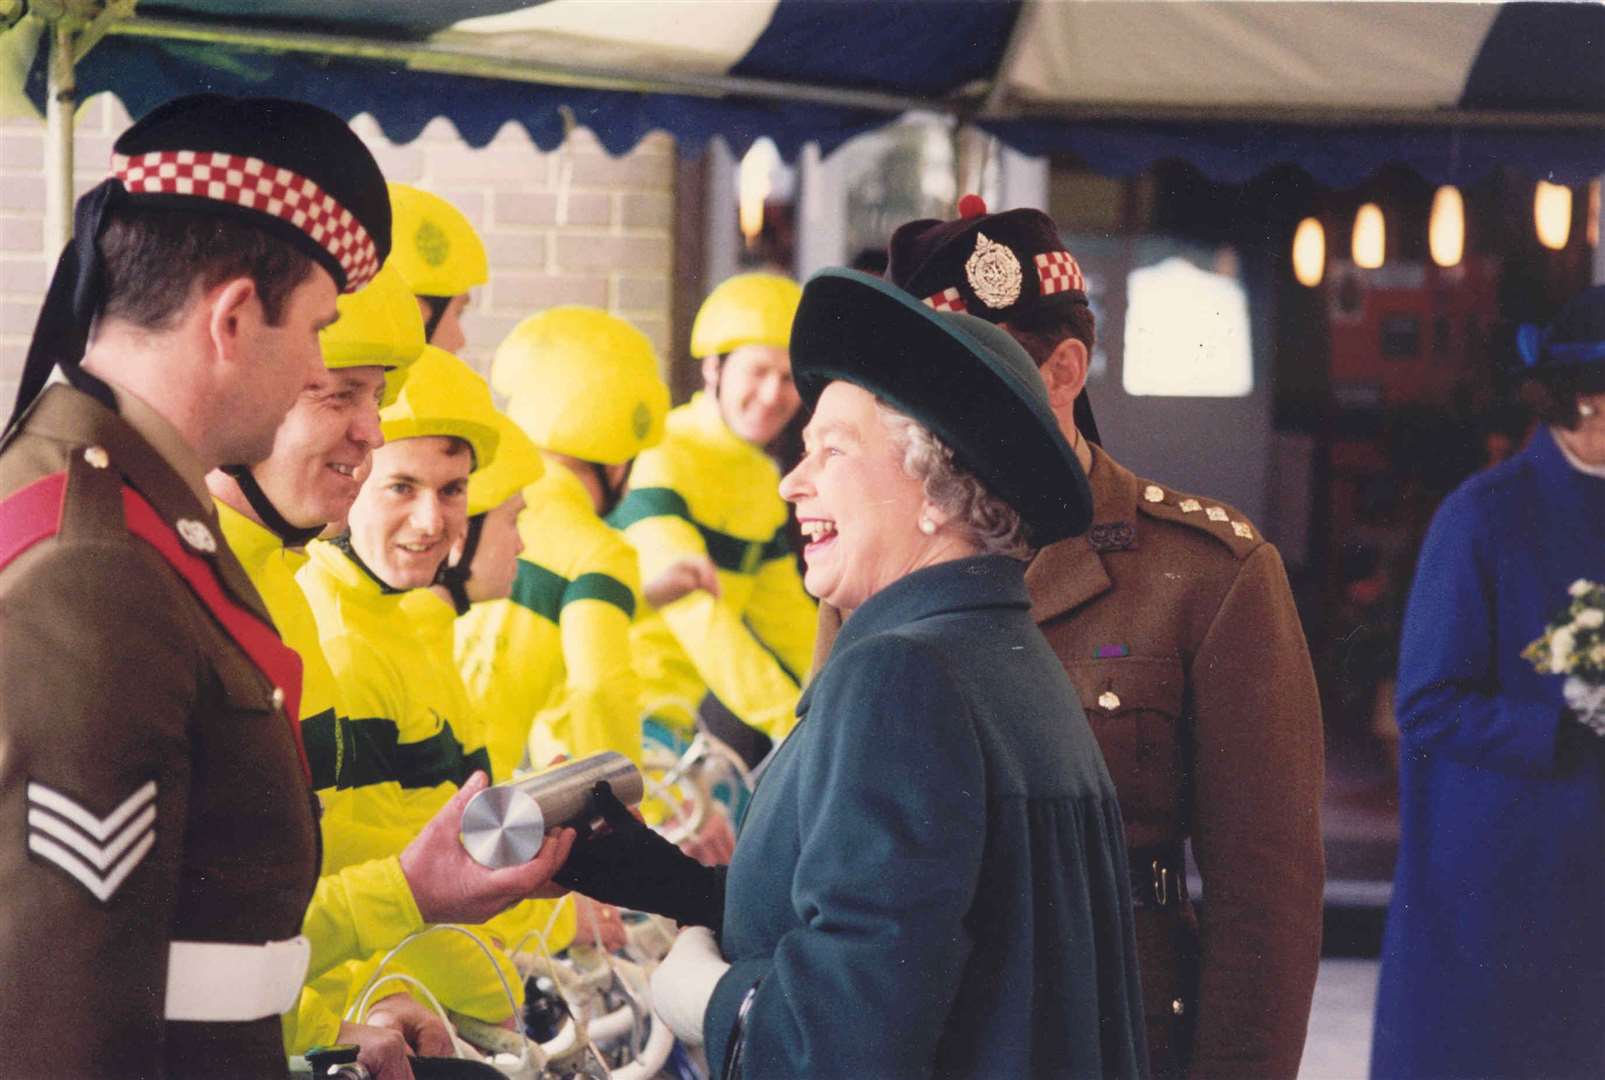 The Queen came to Folkestone in February 1994 to celebrate the 200th anniversary of the Argyll and Sutherland Highlanders Regiment of which she is Colonel-in-Chief. She visited the 650 soldiers at Shorncliffe Barrracks and started a sponsored cycle ride by eight soldiers to Stirling. She is pictured enjoying a laugh with one of the cyclists